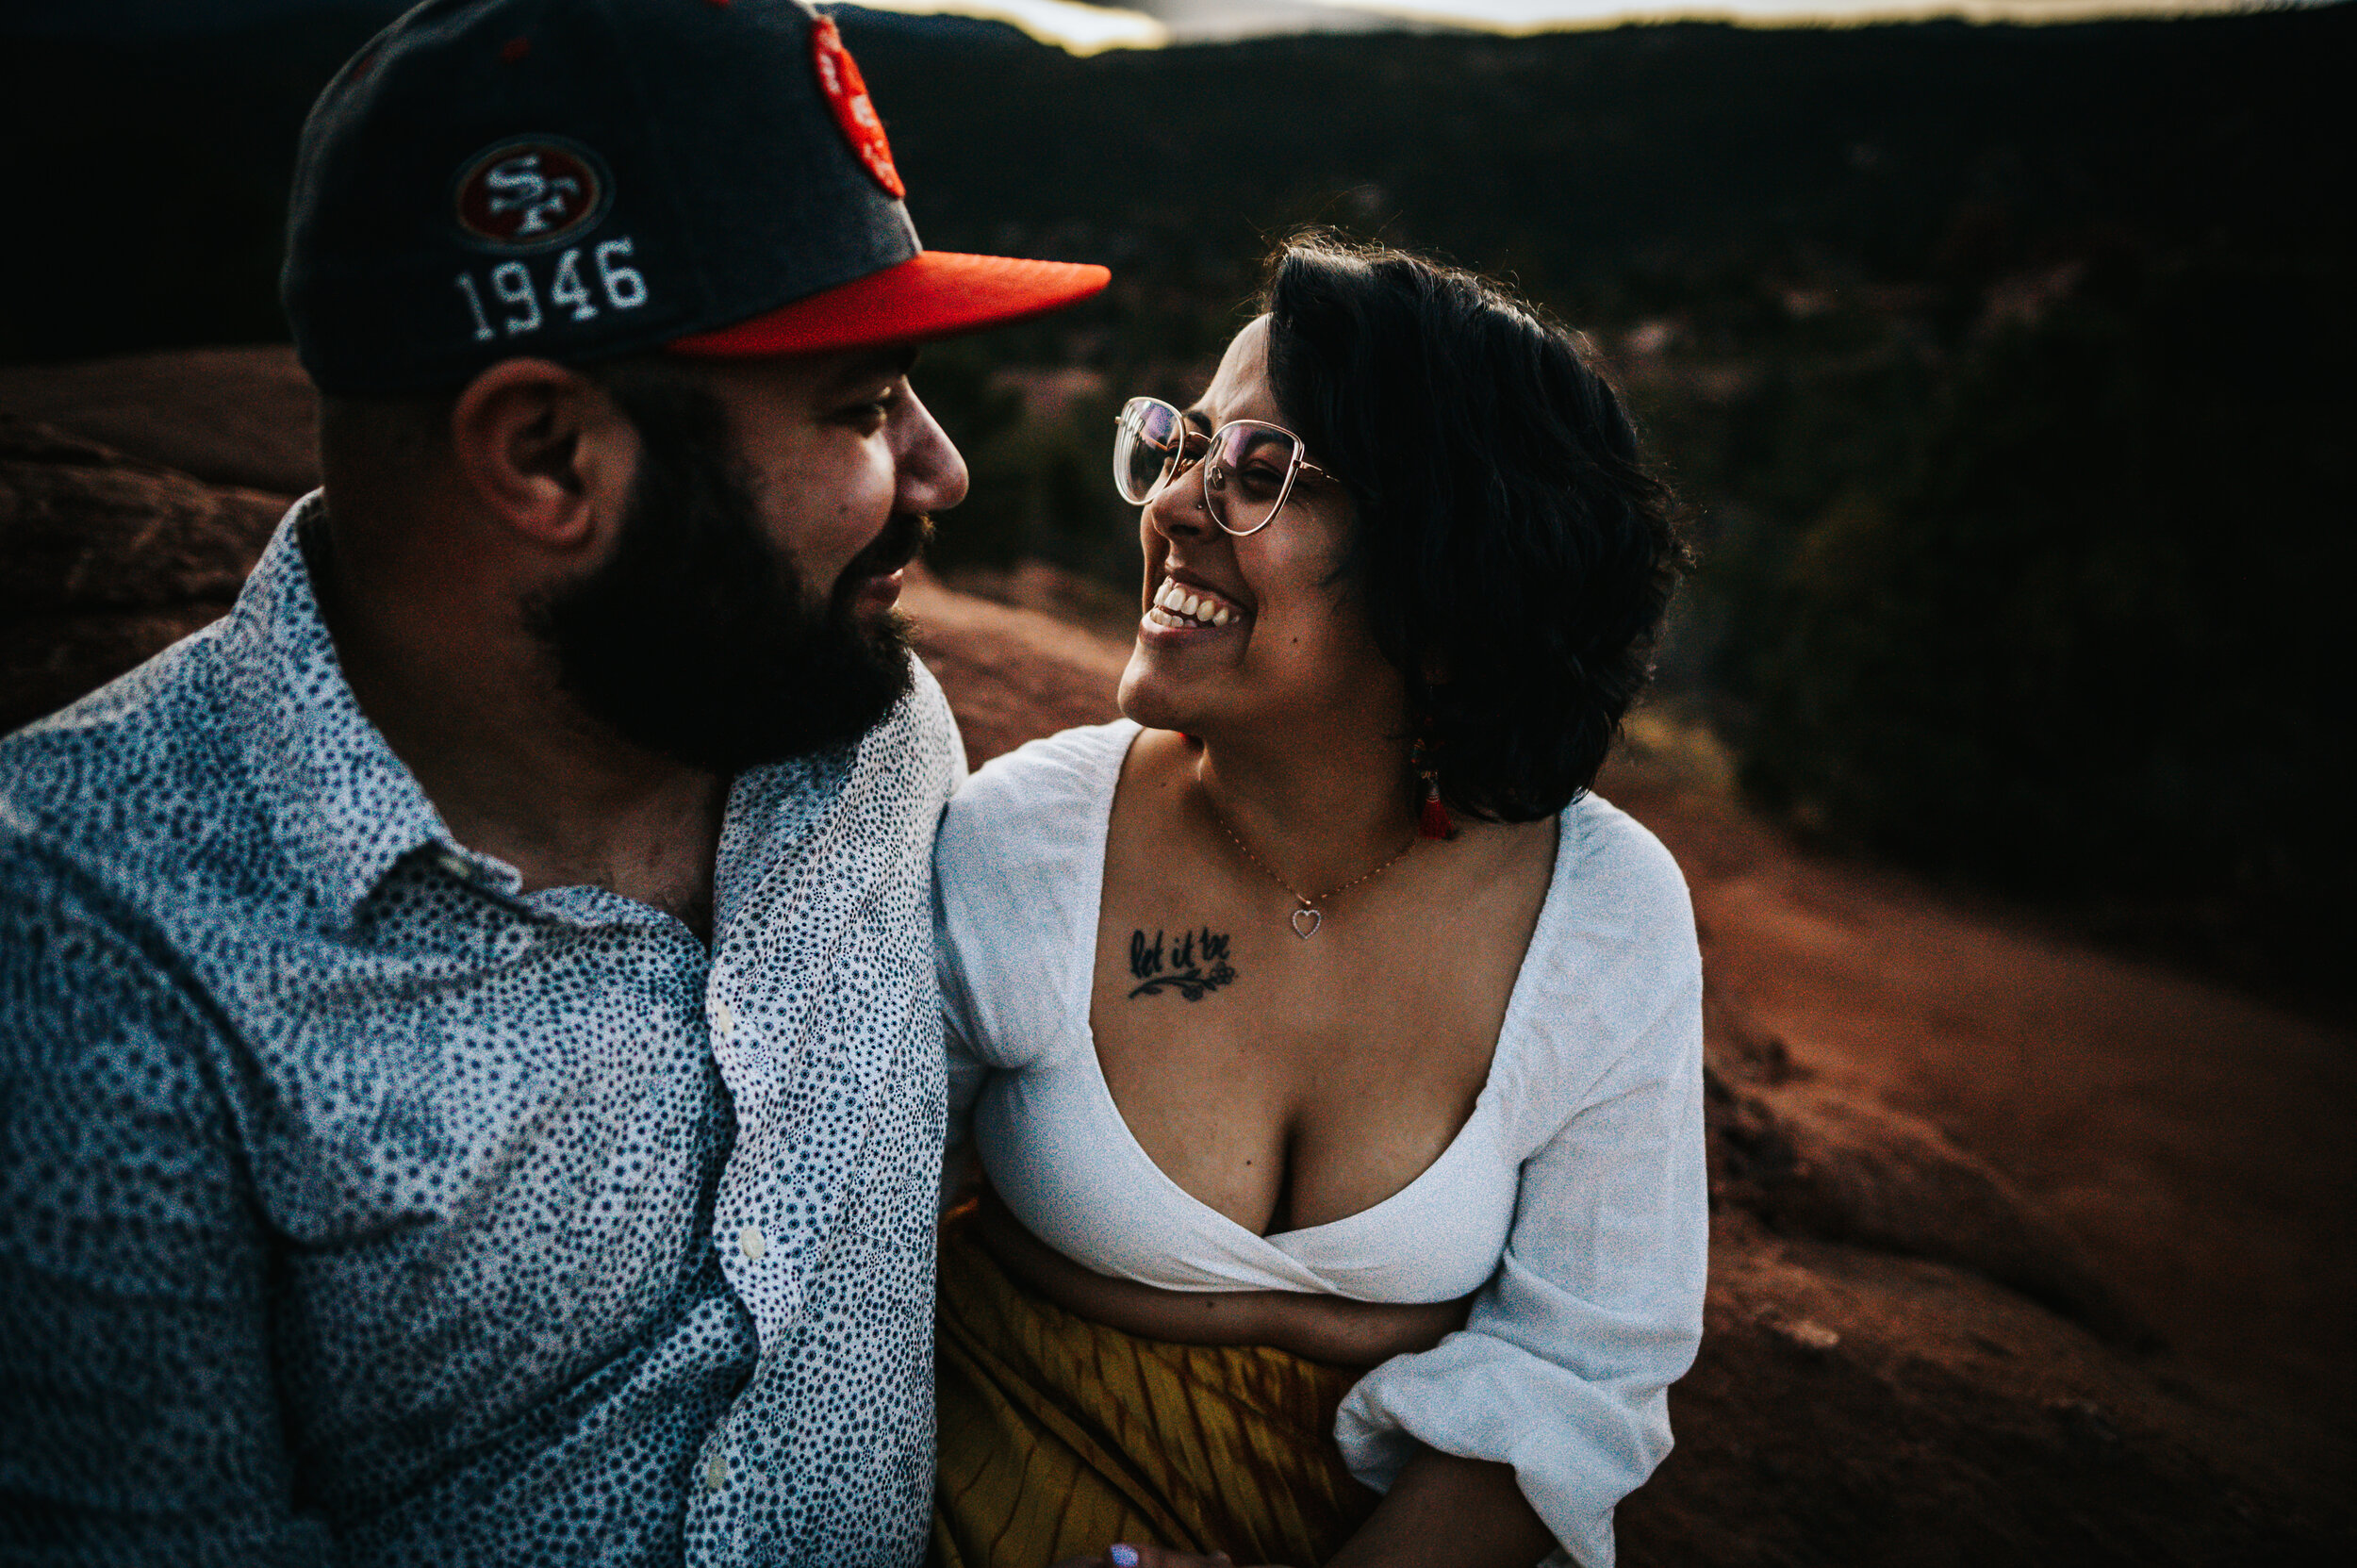 Caroline and Tommy Engagement Session Colorado Springs Colorado Garden of the Gods Wild Prairie Photography-19-2021.jpg